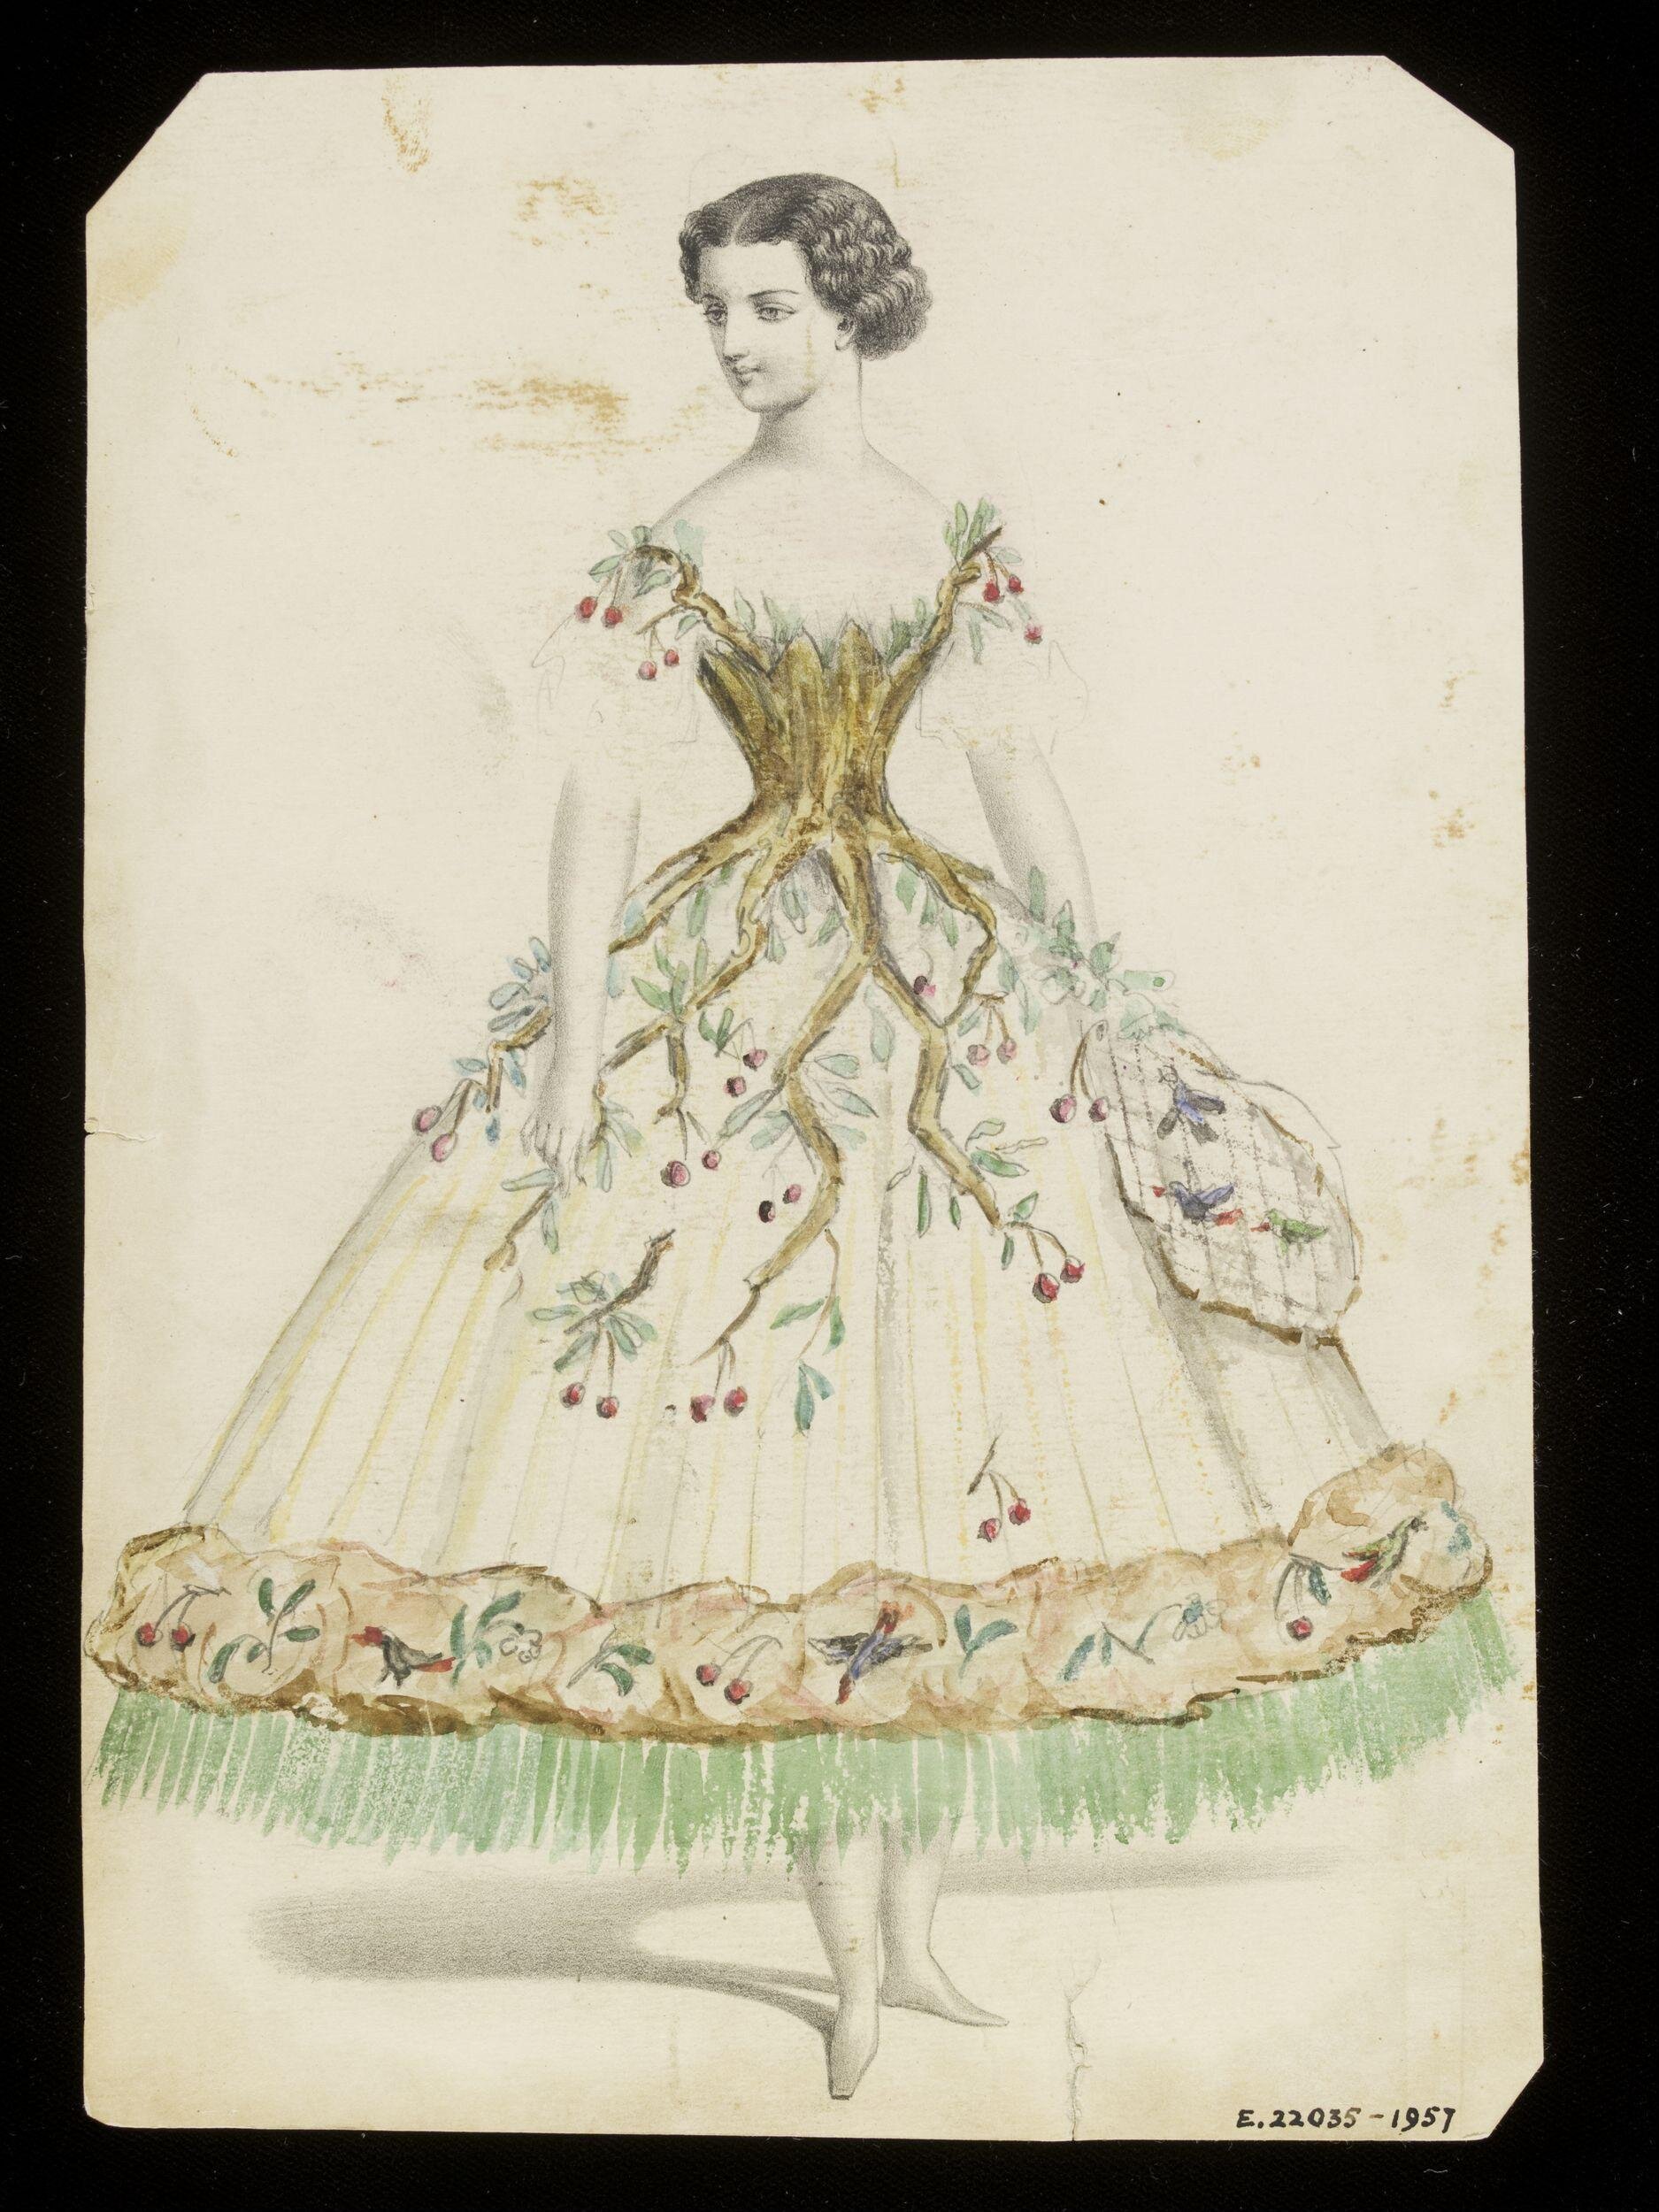 V&A on X: The Art of Fancy Dress. Take a look at these elaborate ball gown  designs, likely created for the magnificent masquerade balls thrown by Empress  Eugenie of France during the